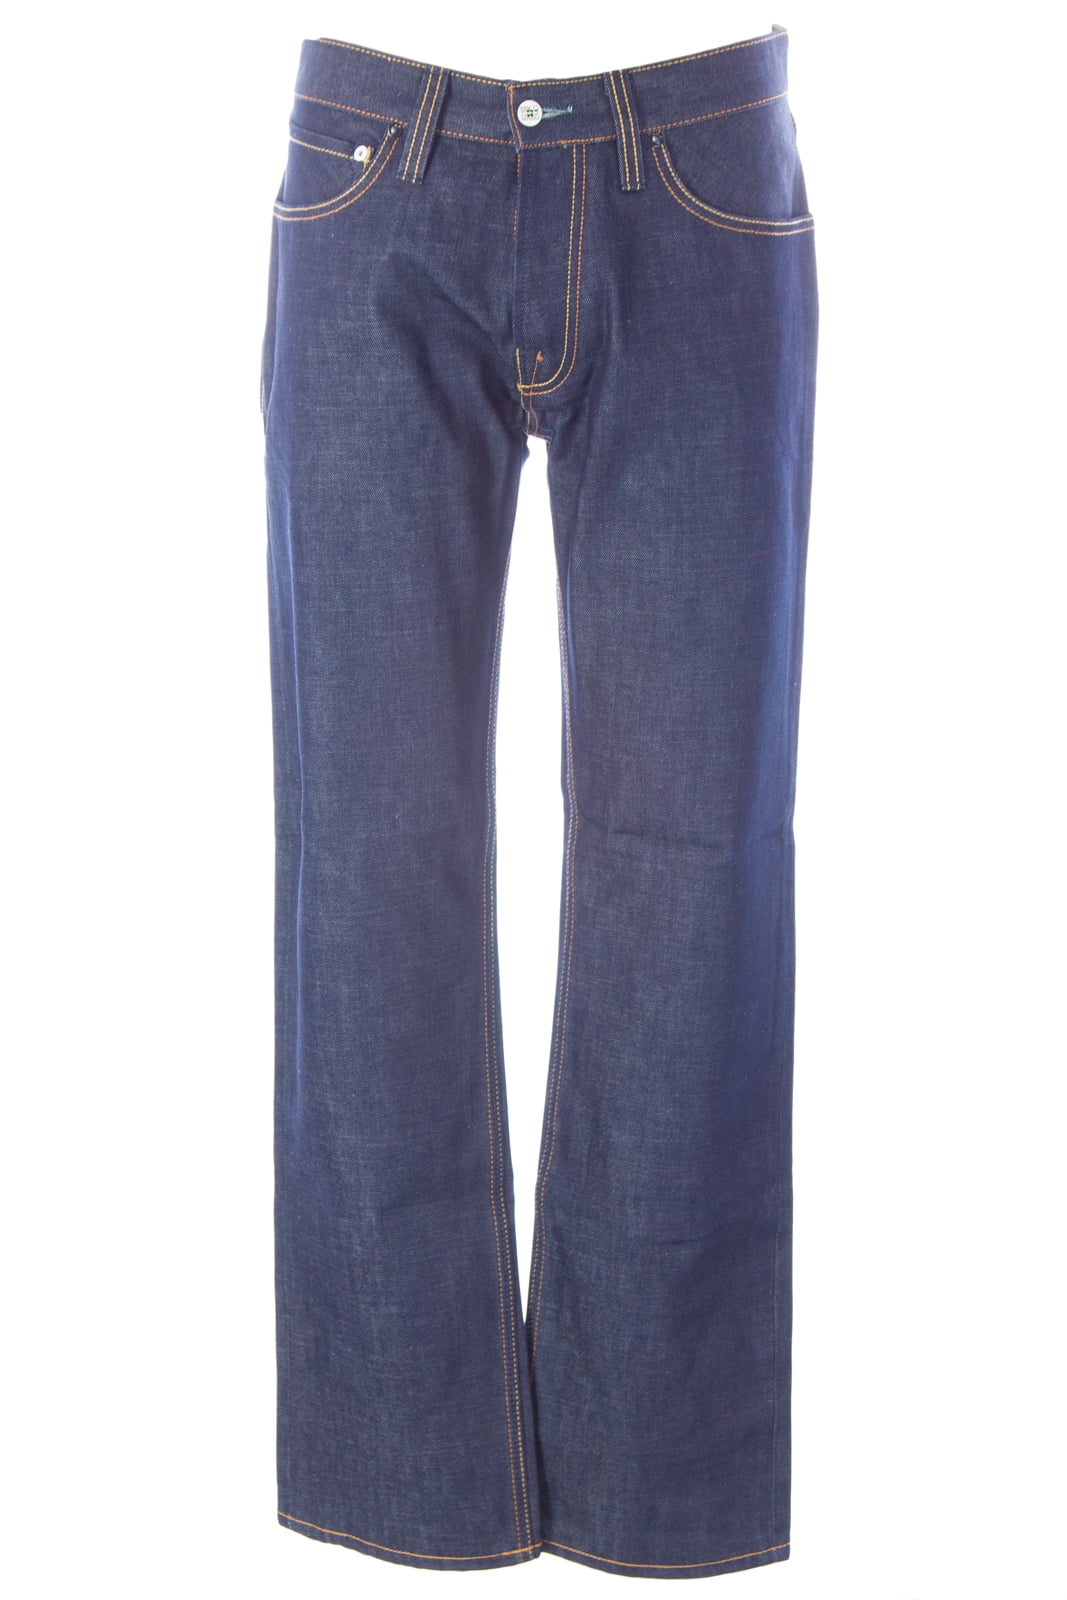 next mens button fly jeans